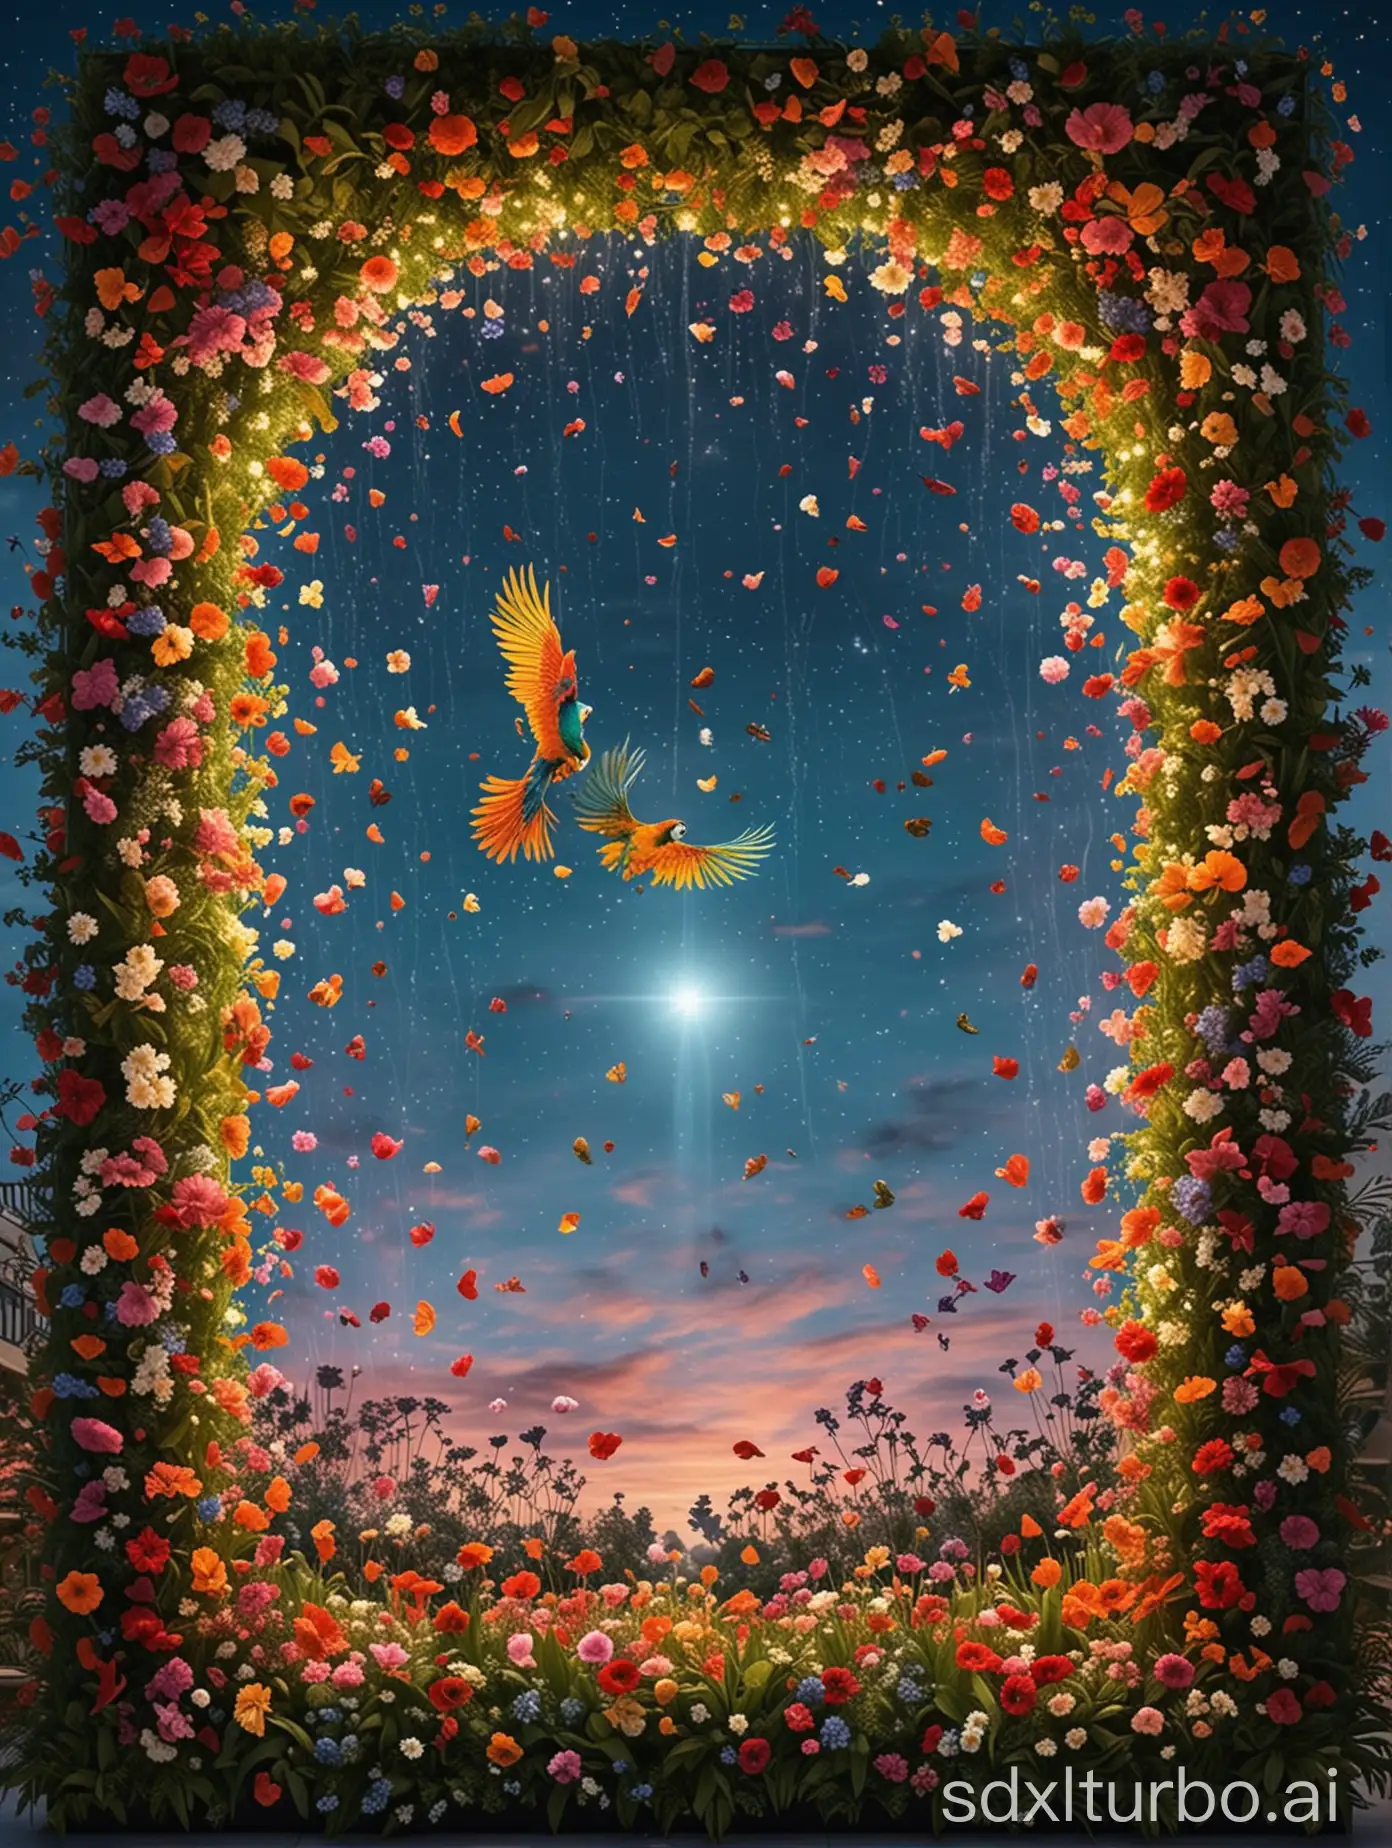 Design a picture of a parrot flying in a sky garden filled with floating flowers, with the flowers emitting a faint glow.